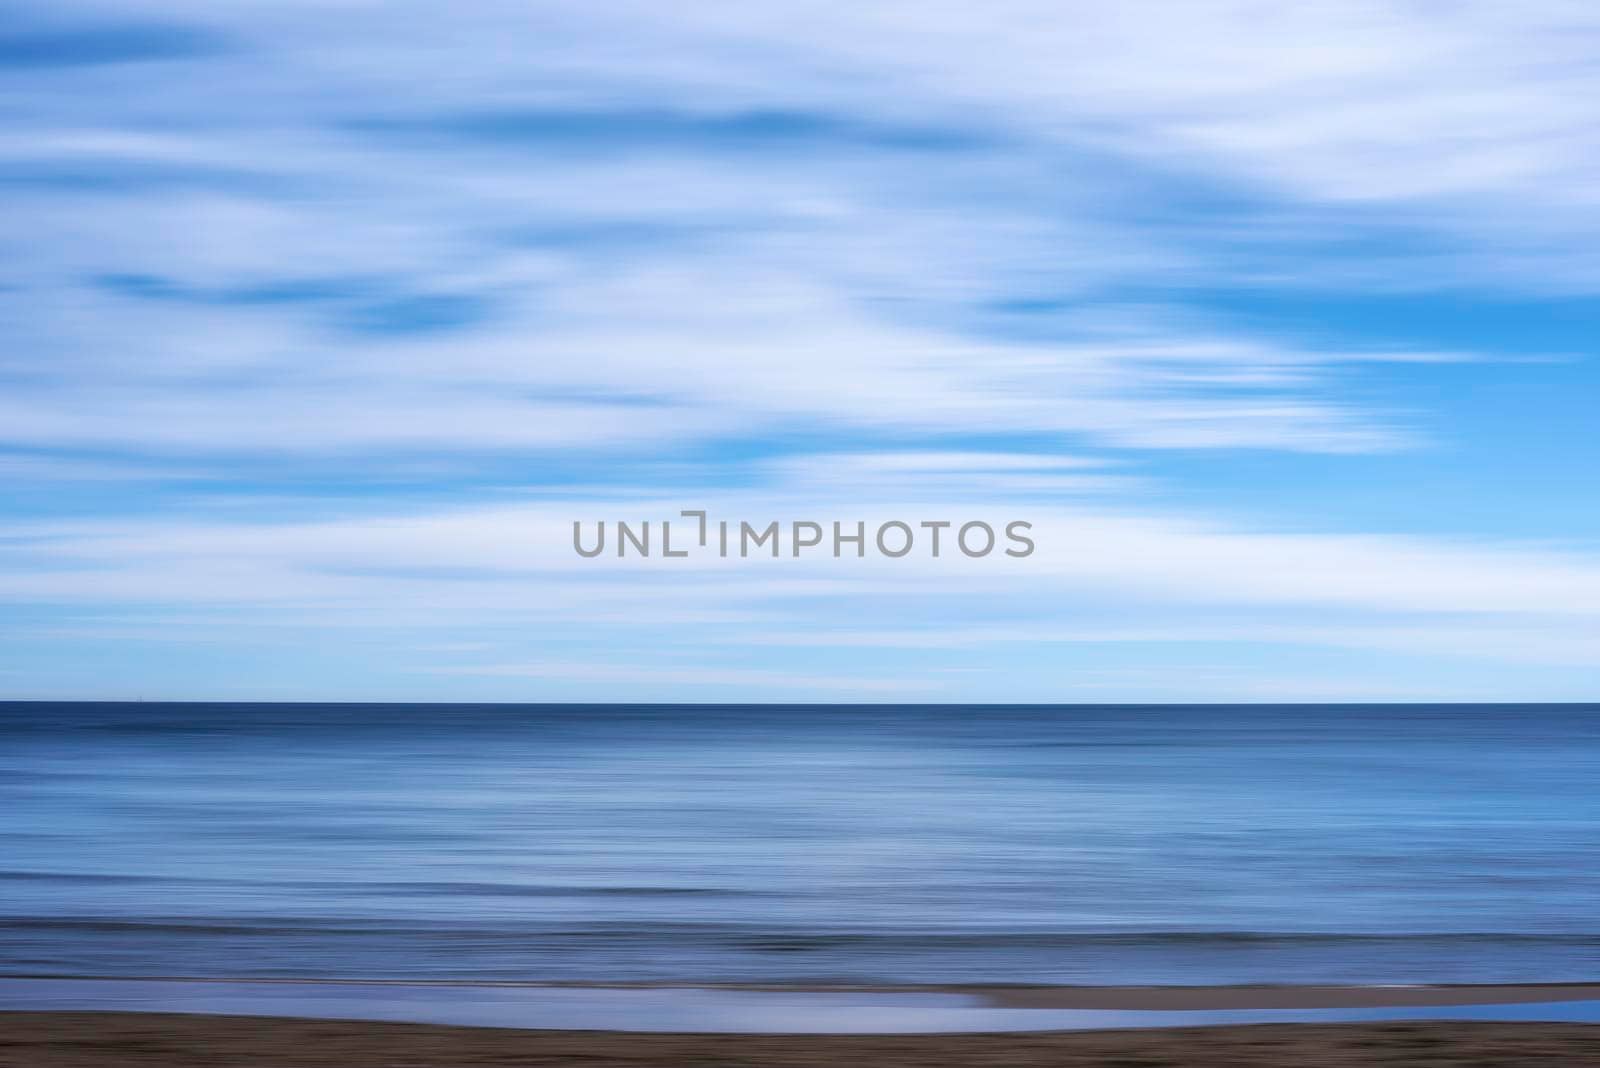 Background of a beach and sky with clouds by raul_ruiz